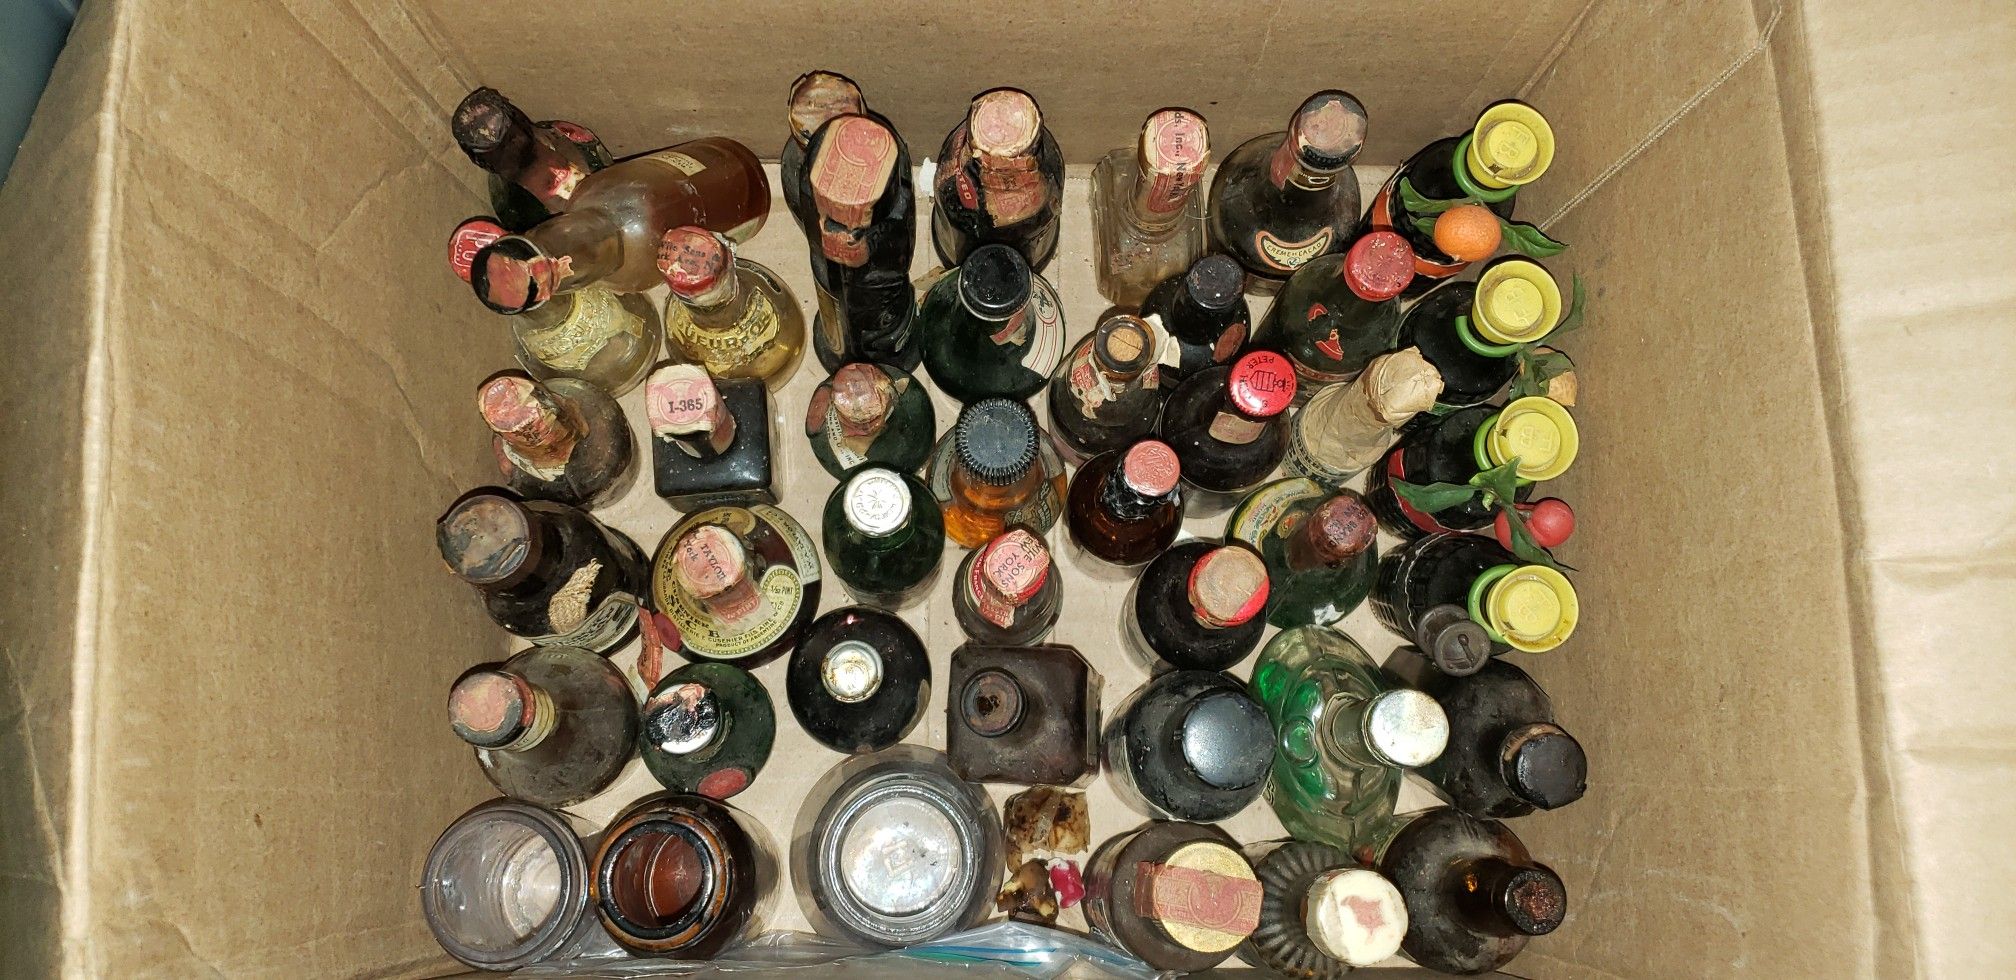 40 Vintage Collectible Mini Bottles and 3 Glass Jars Antique Old